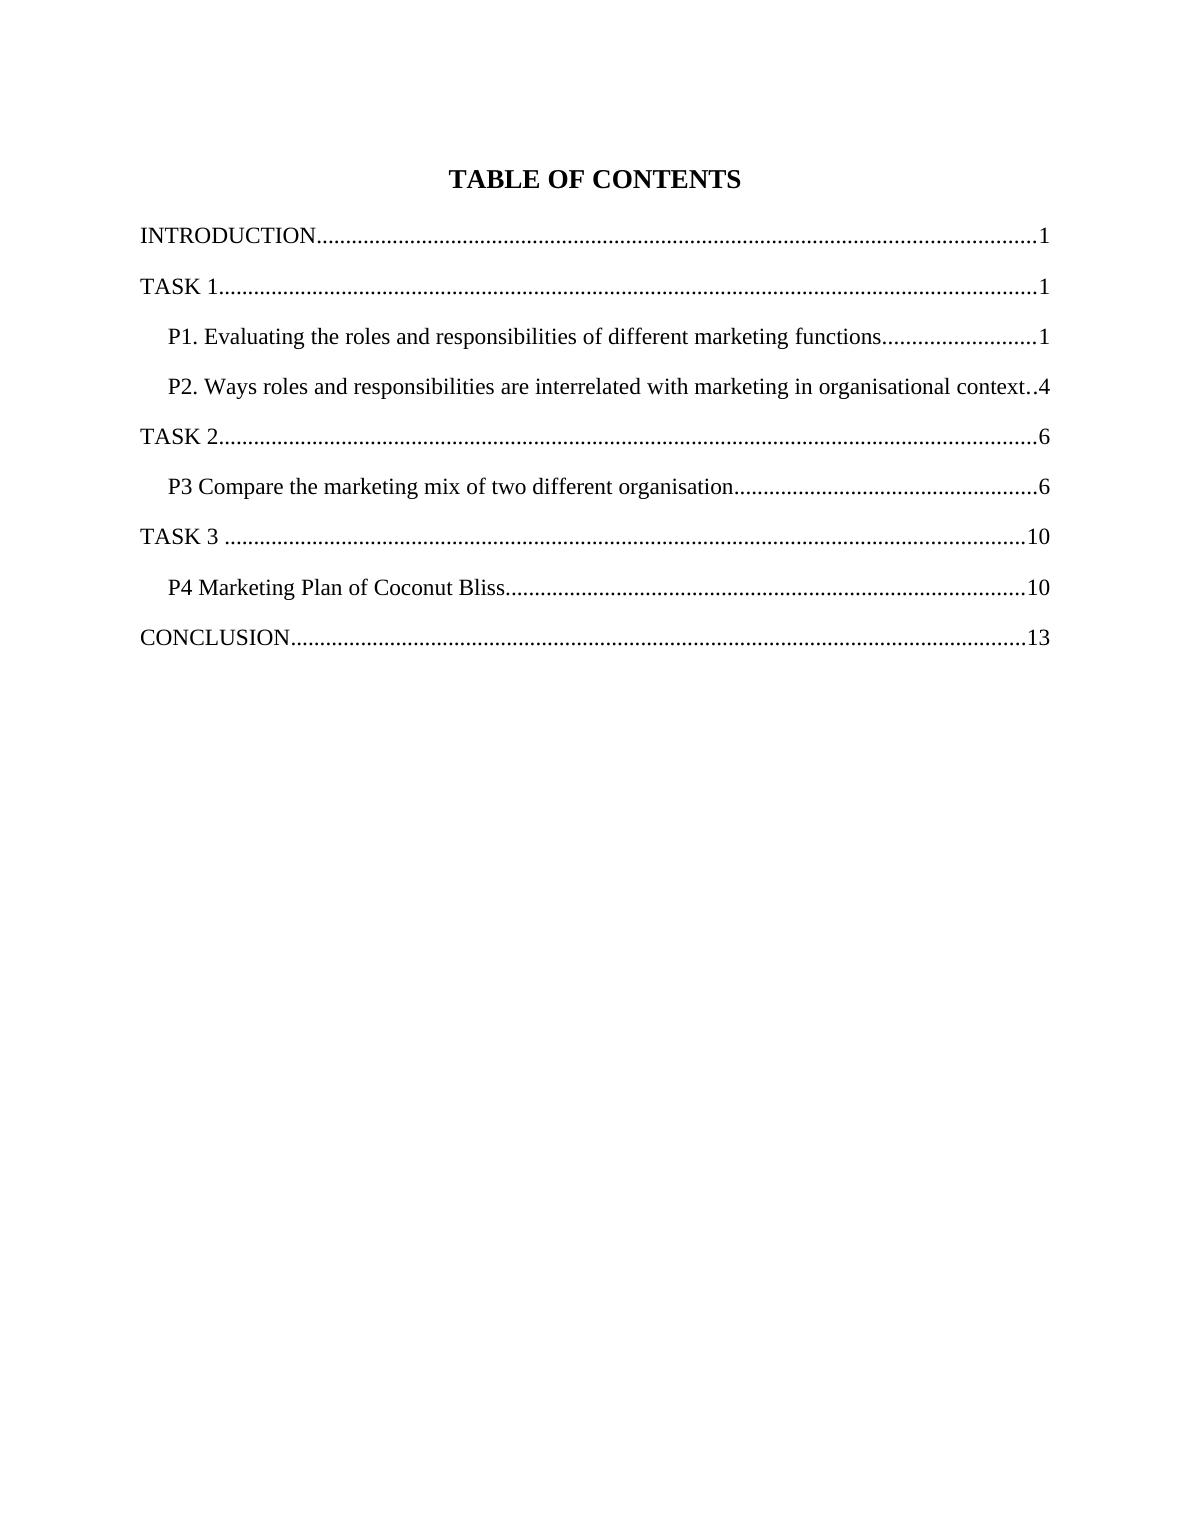 Marketing Essentials TABLE OF CONTENTS_2